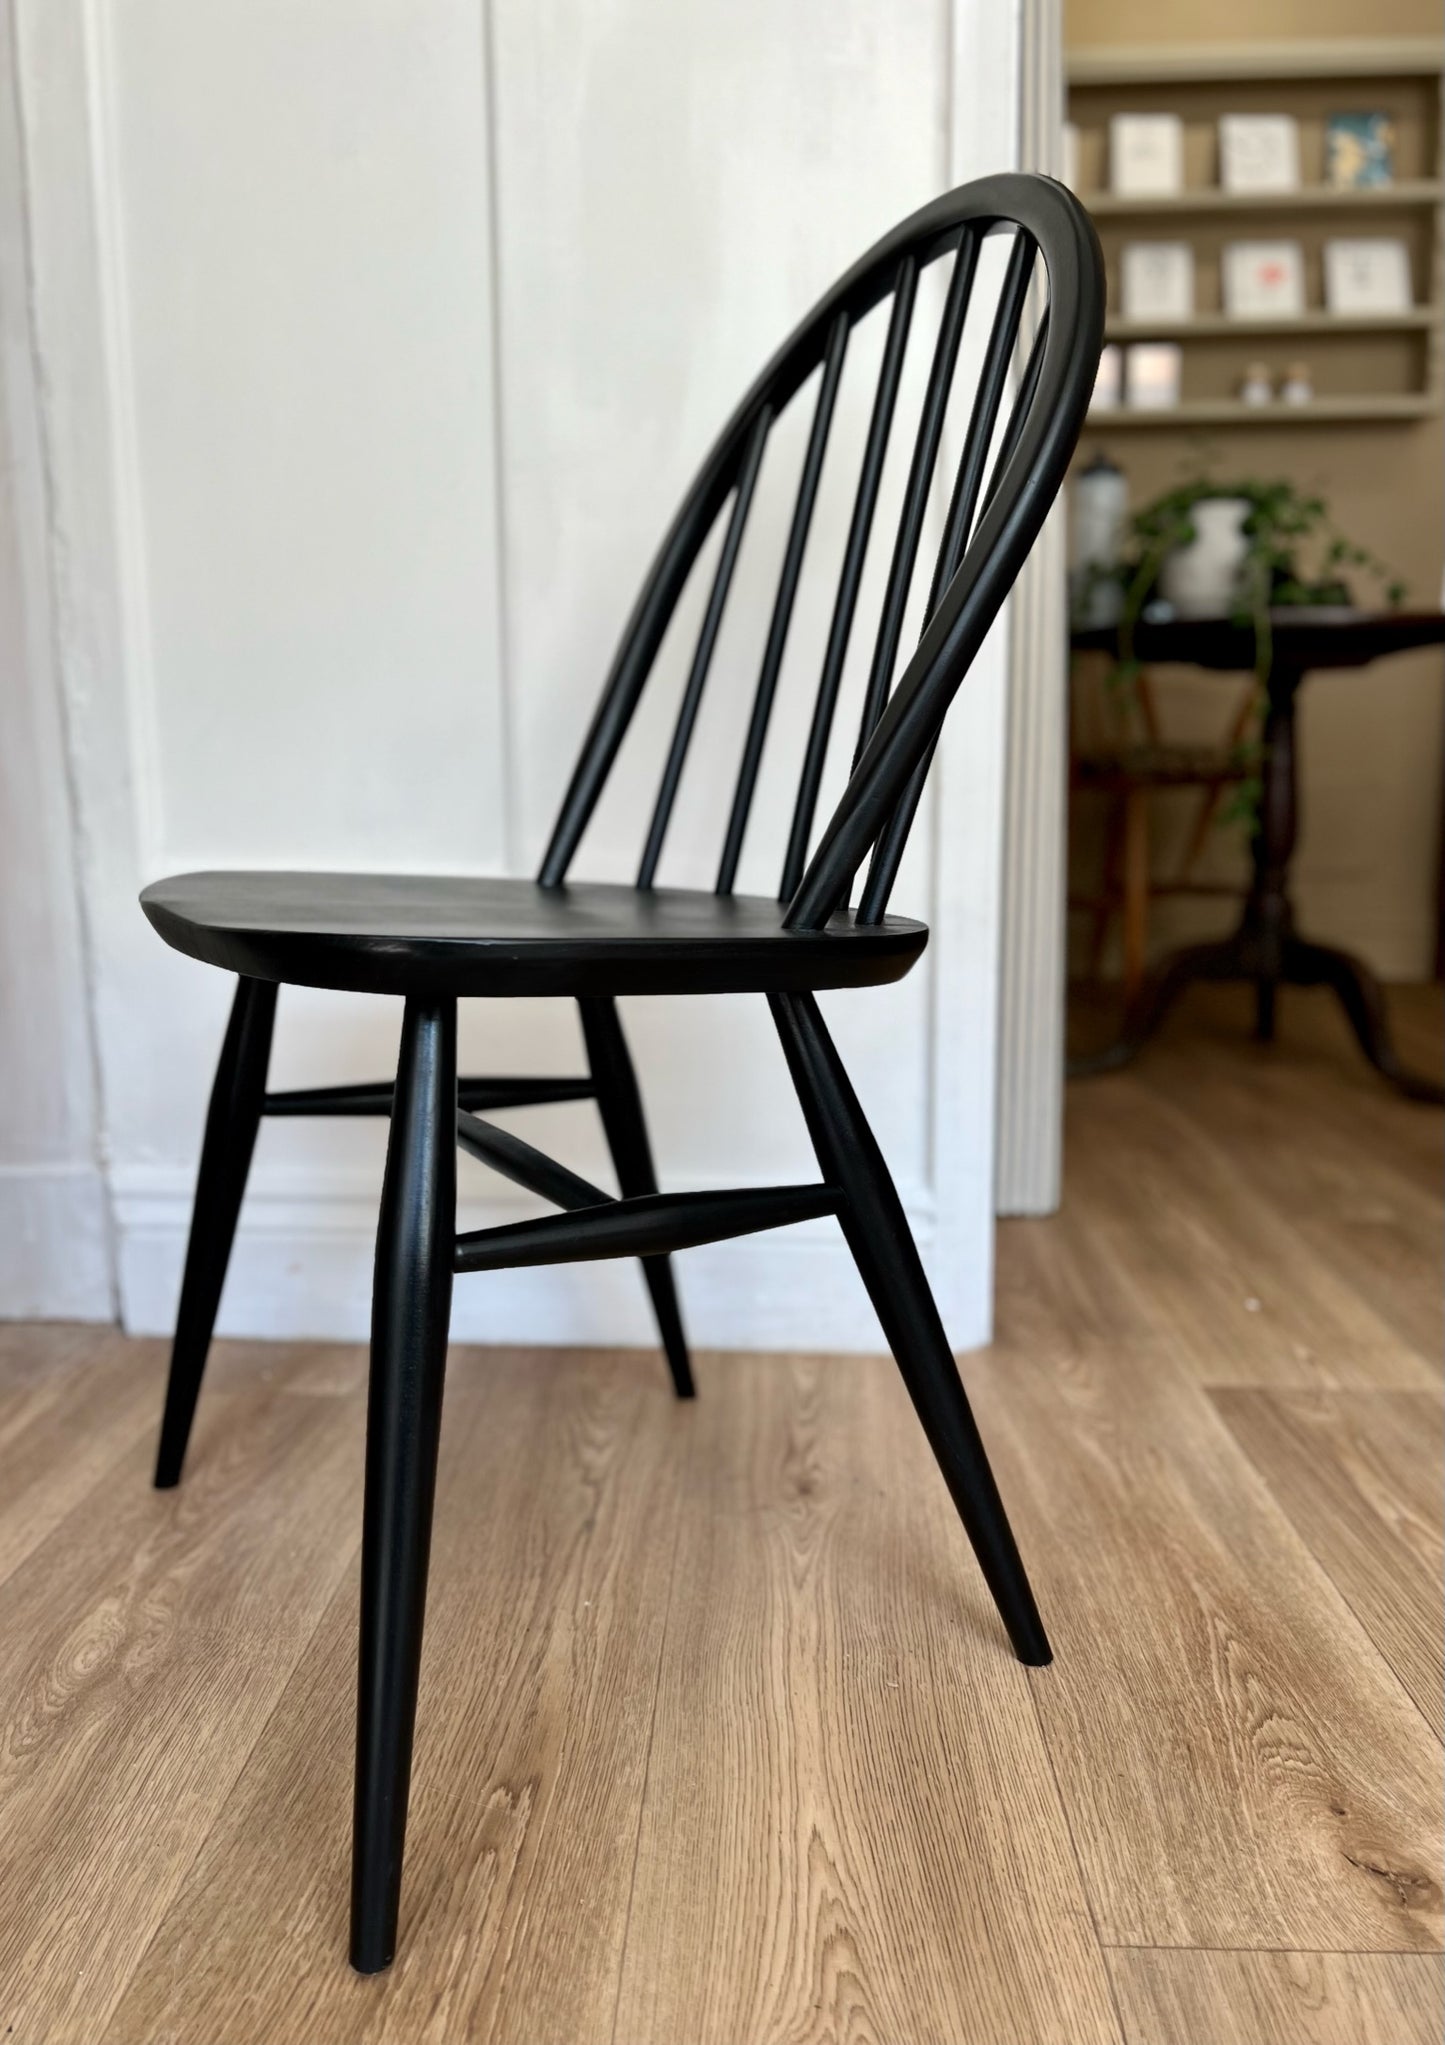 Ercol Windsor dining chair in Black